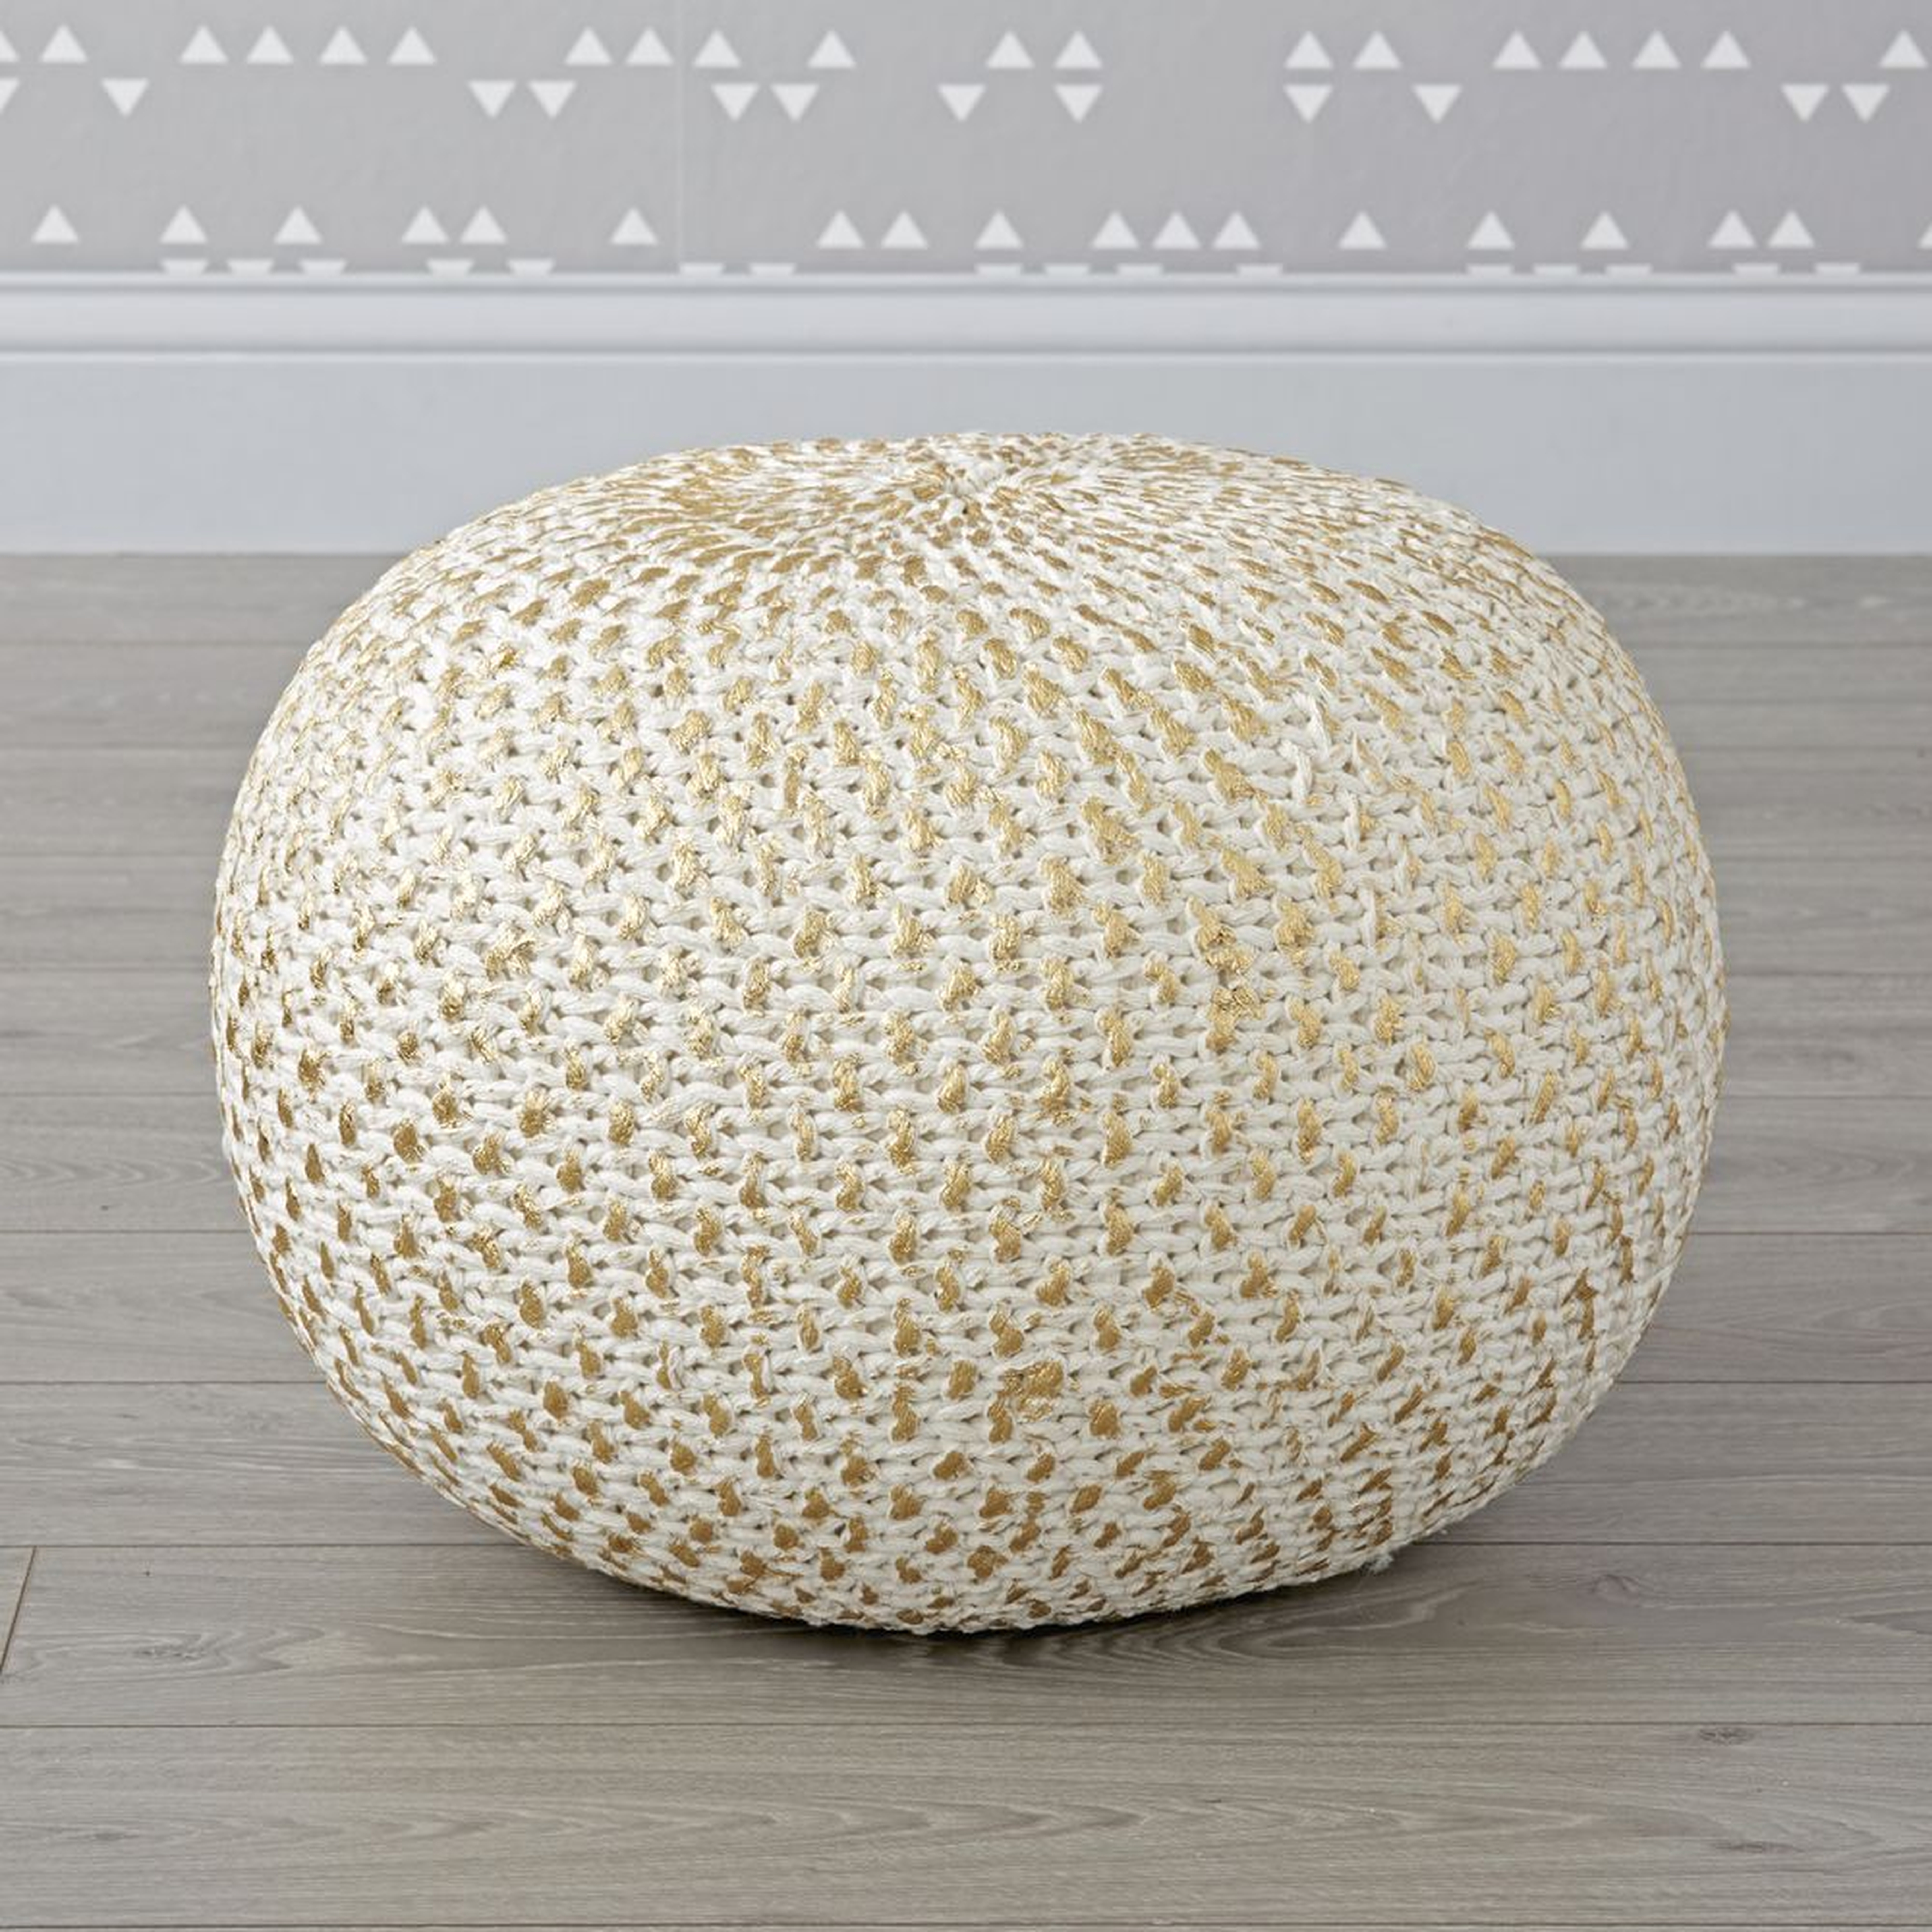 Knit Gold Pouf - Crate and Barrel